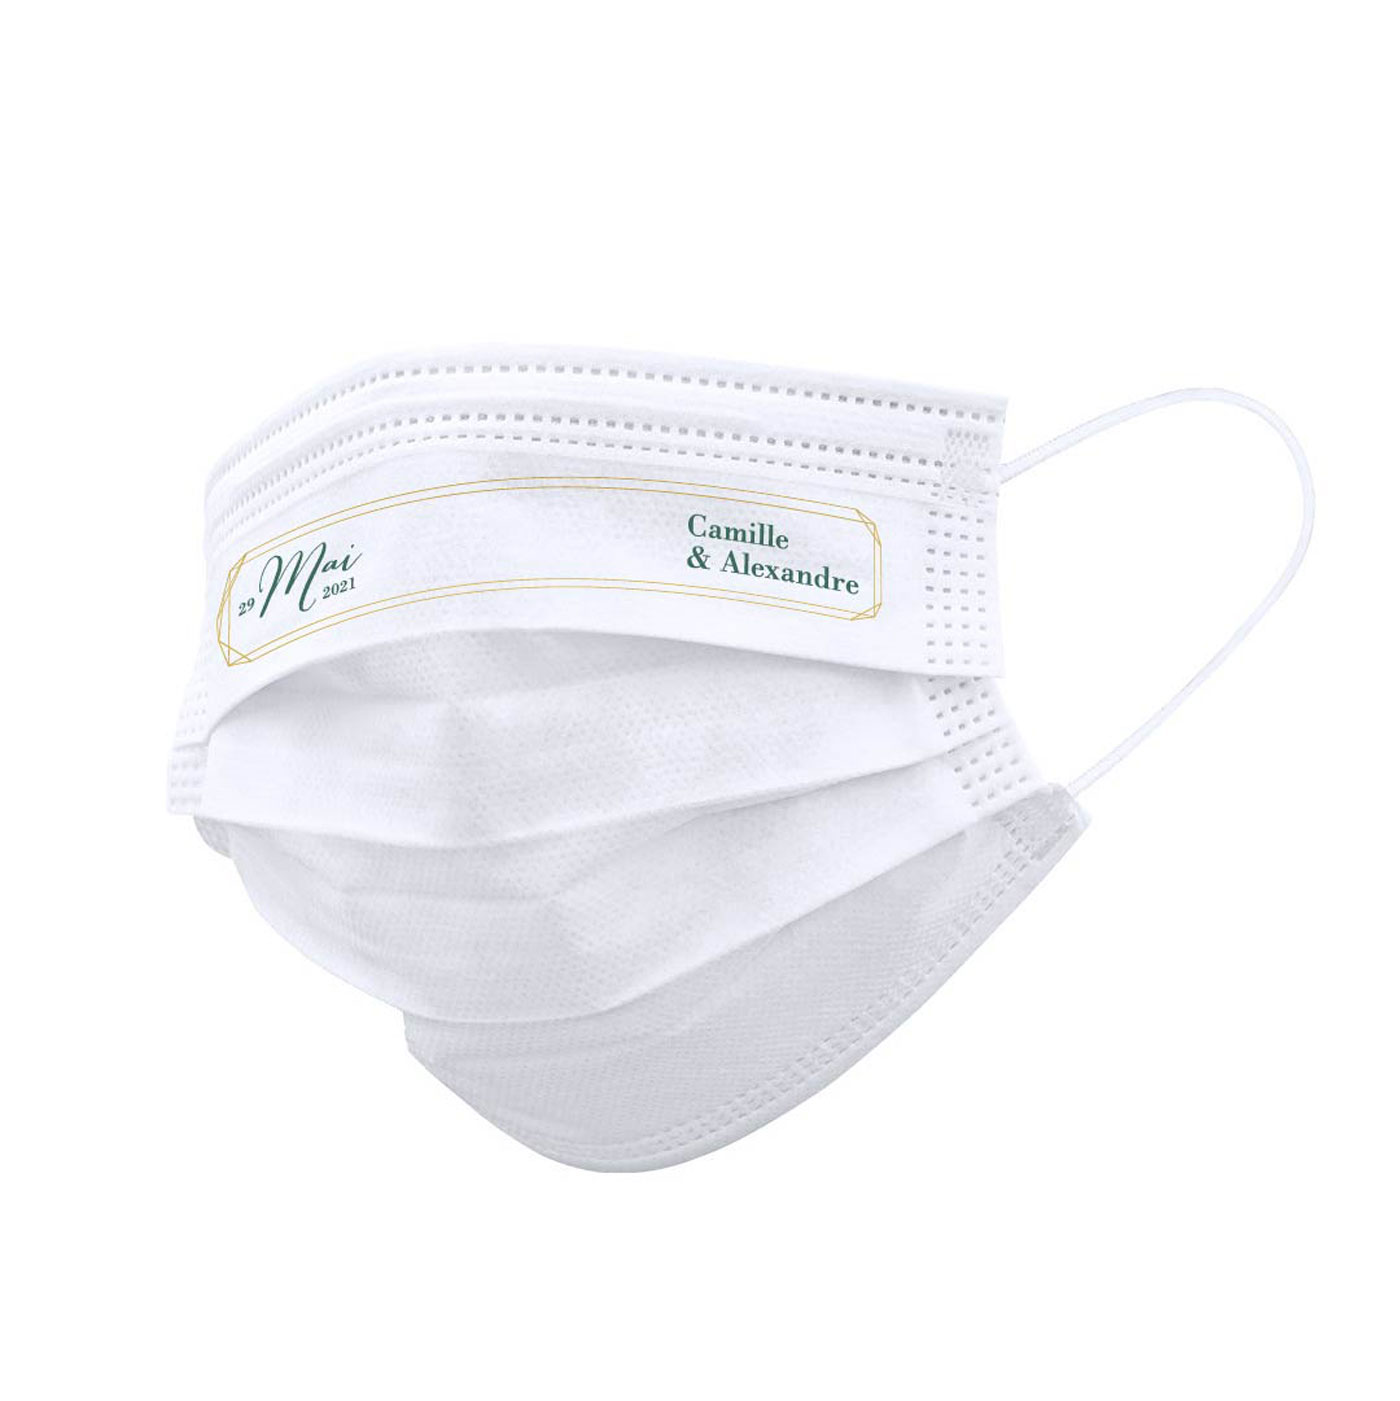 Hygienic Triple-Layer Non-Reusable Face Mask - Sleat